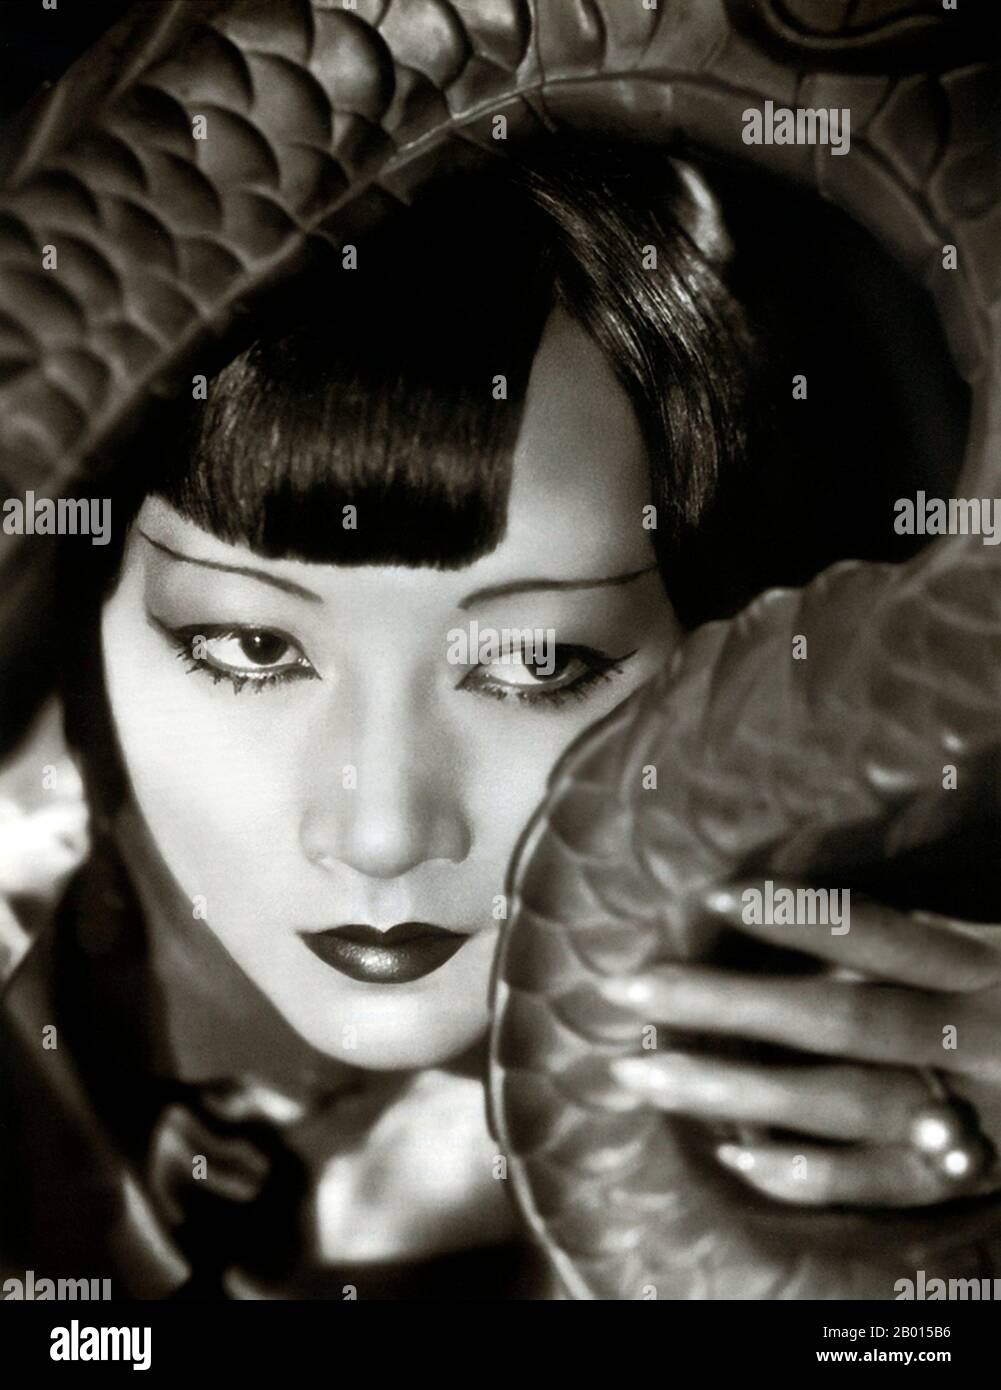 USA: Anna May Wong, Chinese-American movie star (3 January 1905 – 3 February 1961), c. 1931.  Anna May Wong was an American actress, the first Chinese American movie star, and the first Asian American to become an international star. Her long and varied career spanned both silent and sound film, television, stage, and radio.  Born near the Chinatown neighborhood of Los Angeles to second-generation Chinese-American parents, Wong became infatuated with the movies and began acting in films at an early age. Stock Photo